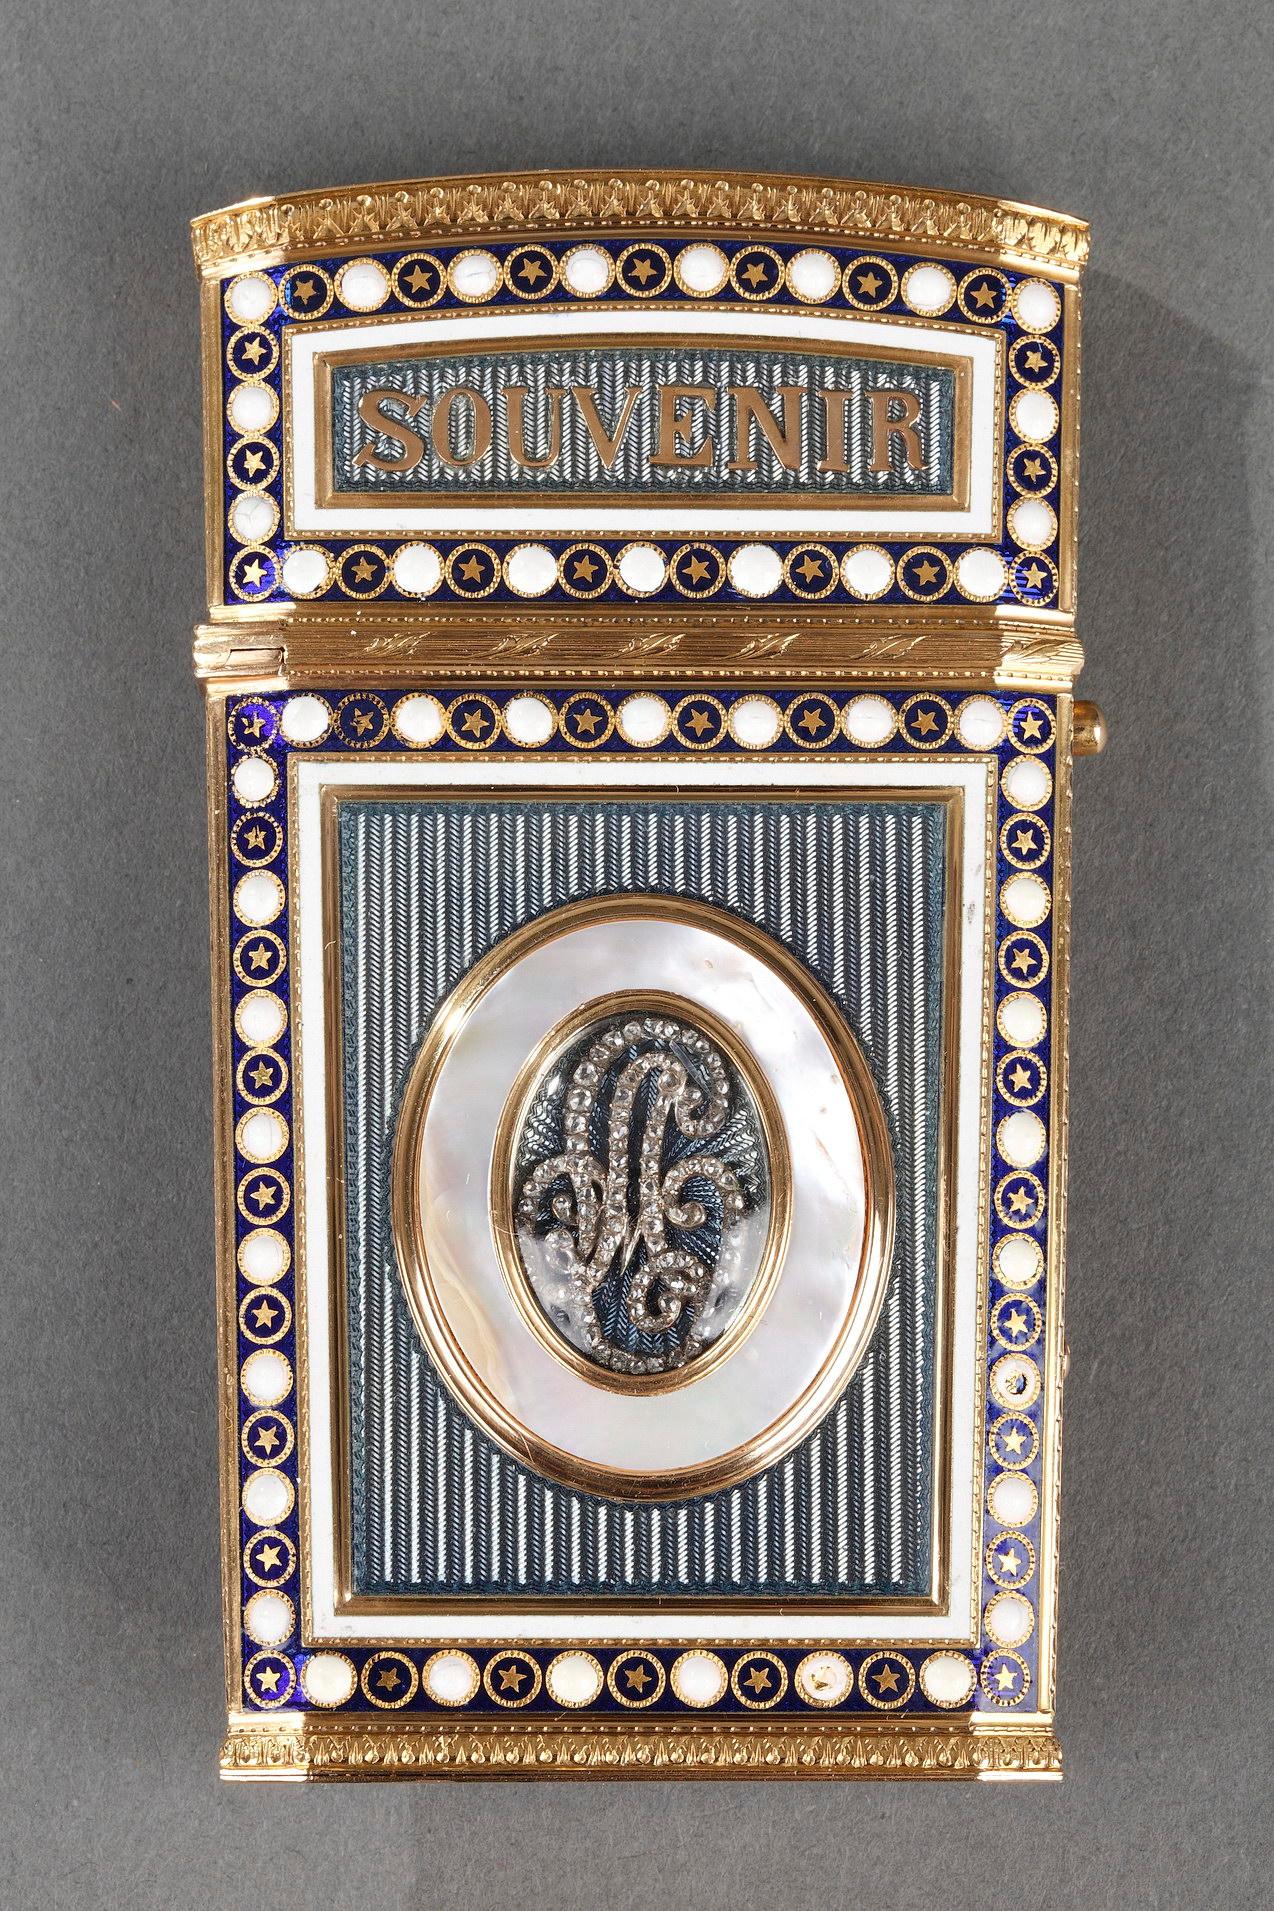 Women's or Men's Tablet Case in Gold with Enamel, Late 18th Century